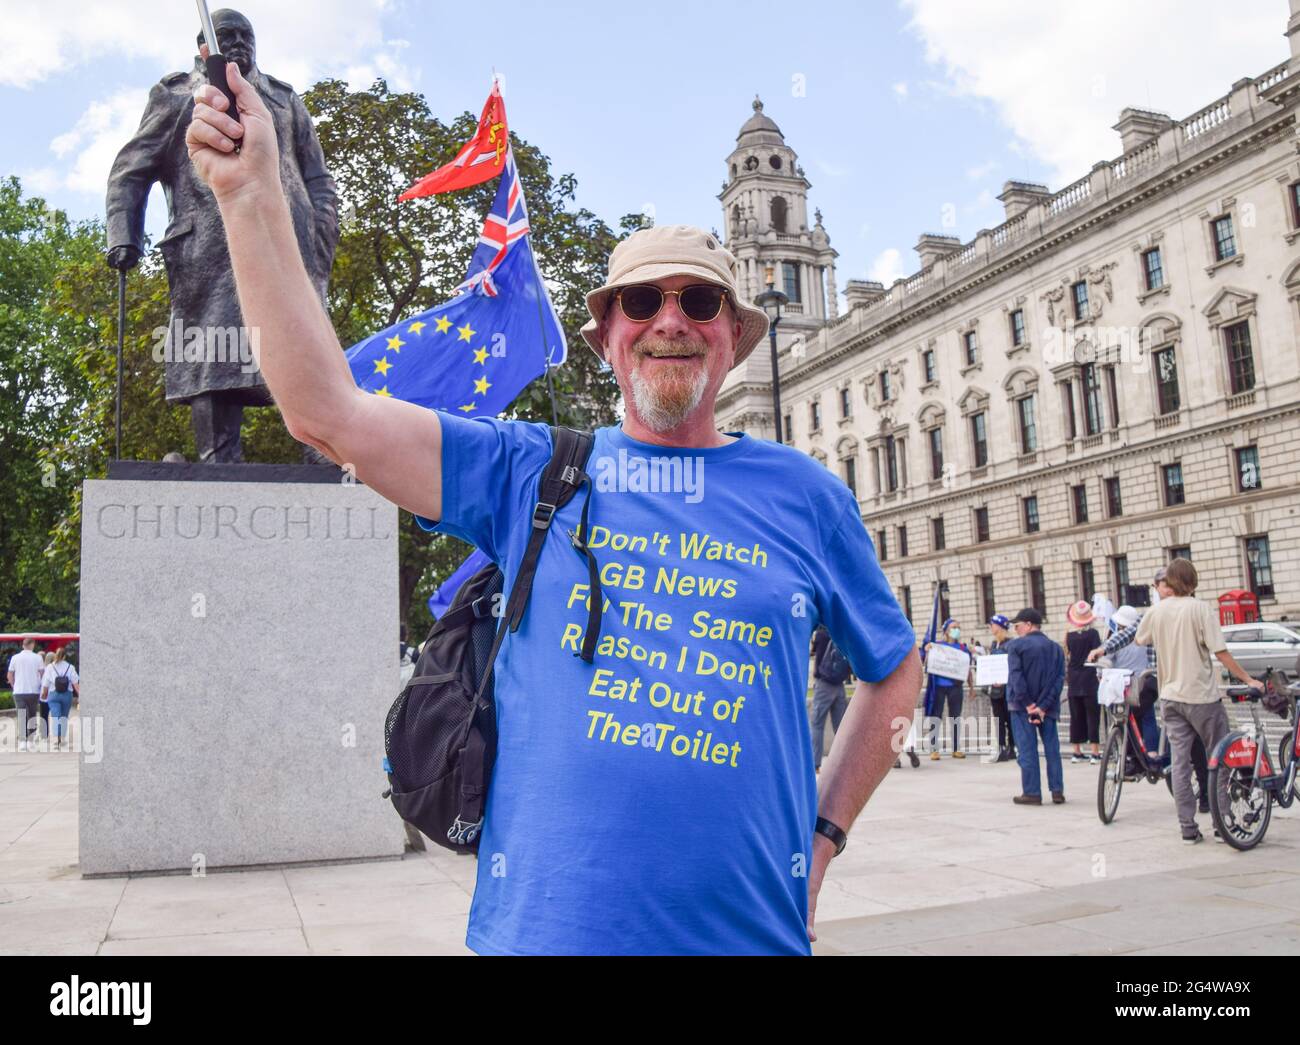 London, UK. 23rd June, 2021. A demonstrator wears an anti-GB News t-shirt during the anti-Brexit protest outside the parliament in London.Protesters gathered outside the Houses of Parliament on the fifth anniversary of the referendum. Credit: SOPA Images Limited/Alamy Live News Stock Photo